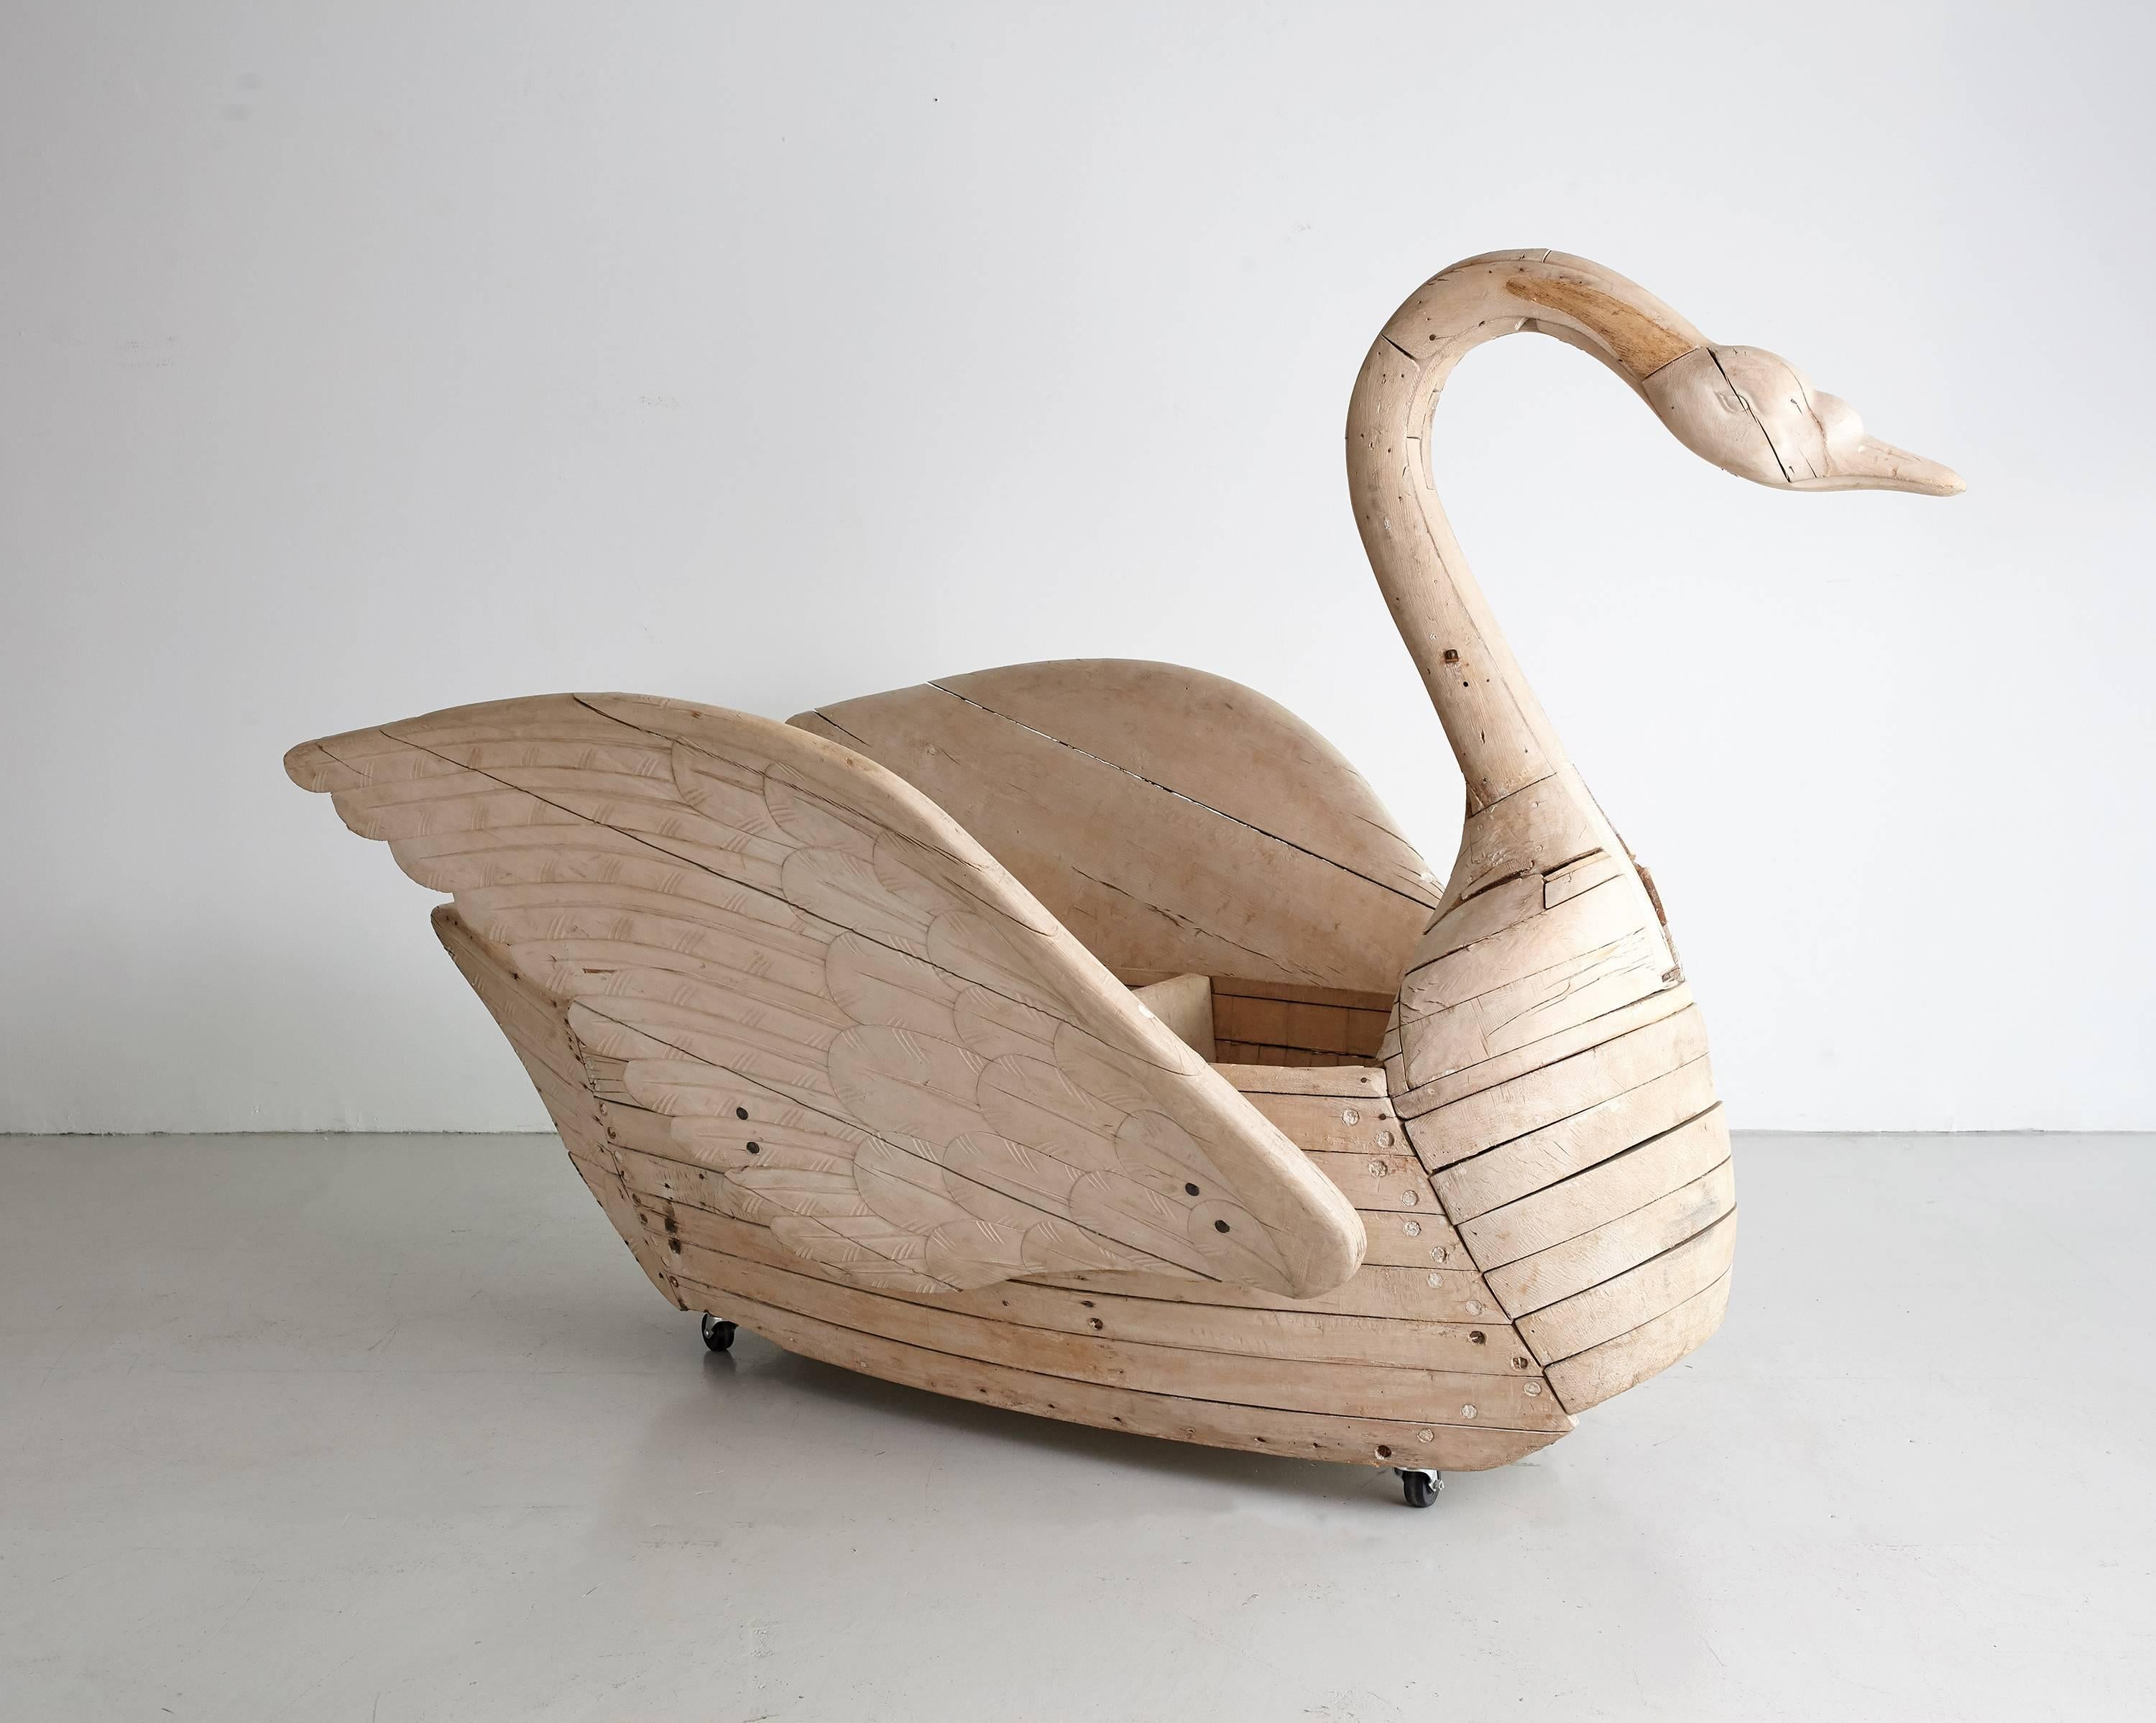 Grand, whimsical hand-carved wooden swan seat from a French carousel, circa 1920. Perhaps the most elegant thing ever to land at the Orange Gallery! Beautiful in a nursery or outdoor in a play area. Incredible one-of-a-kind piece. 

 